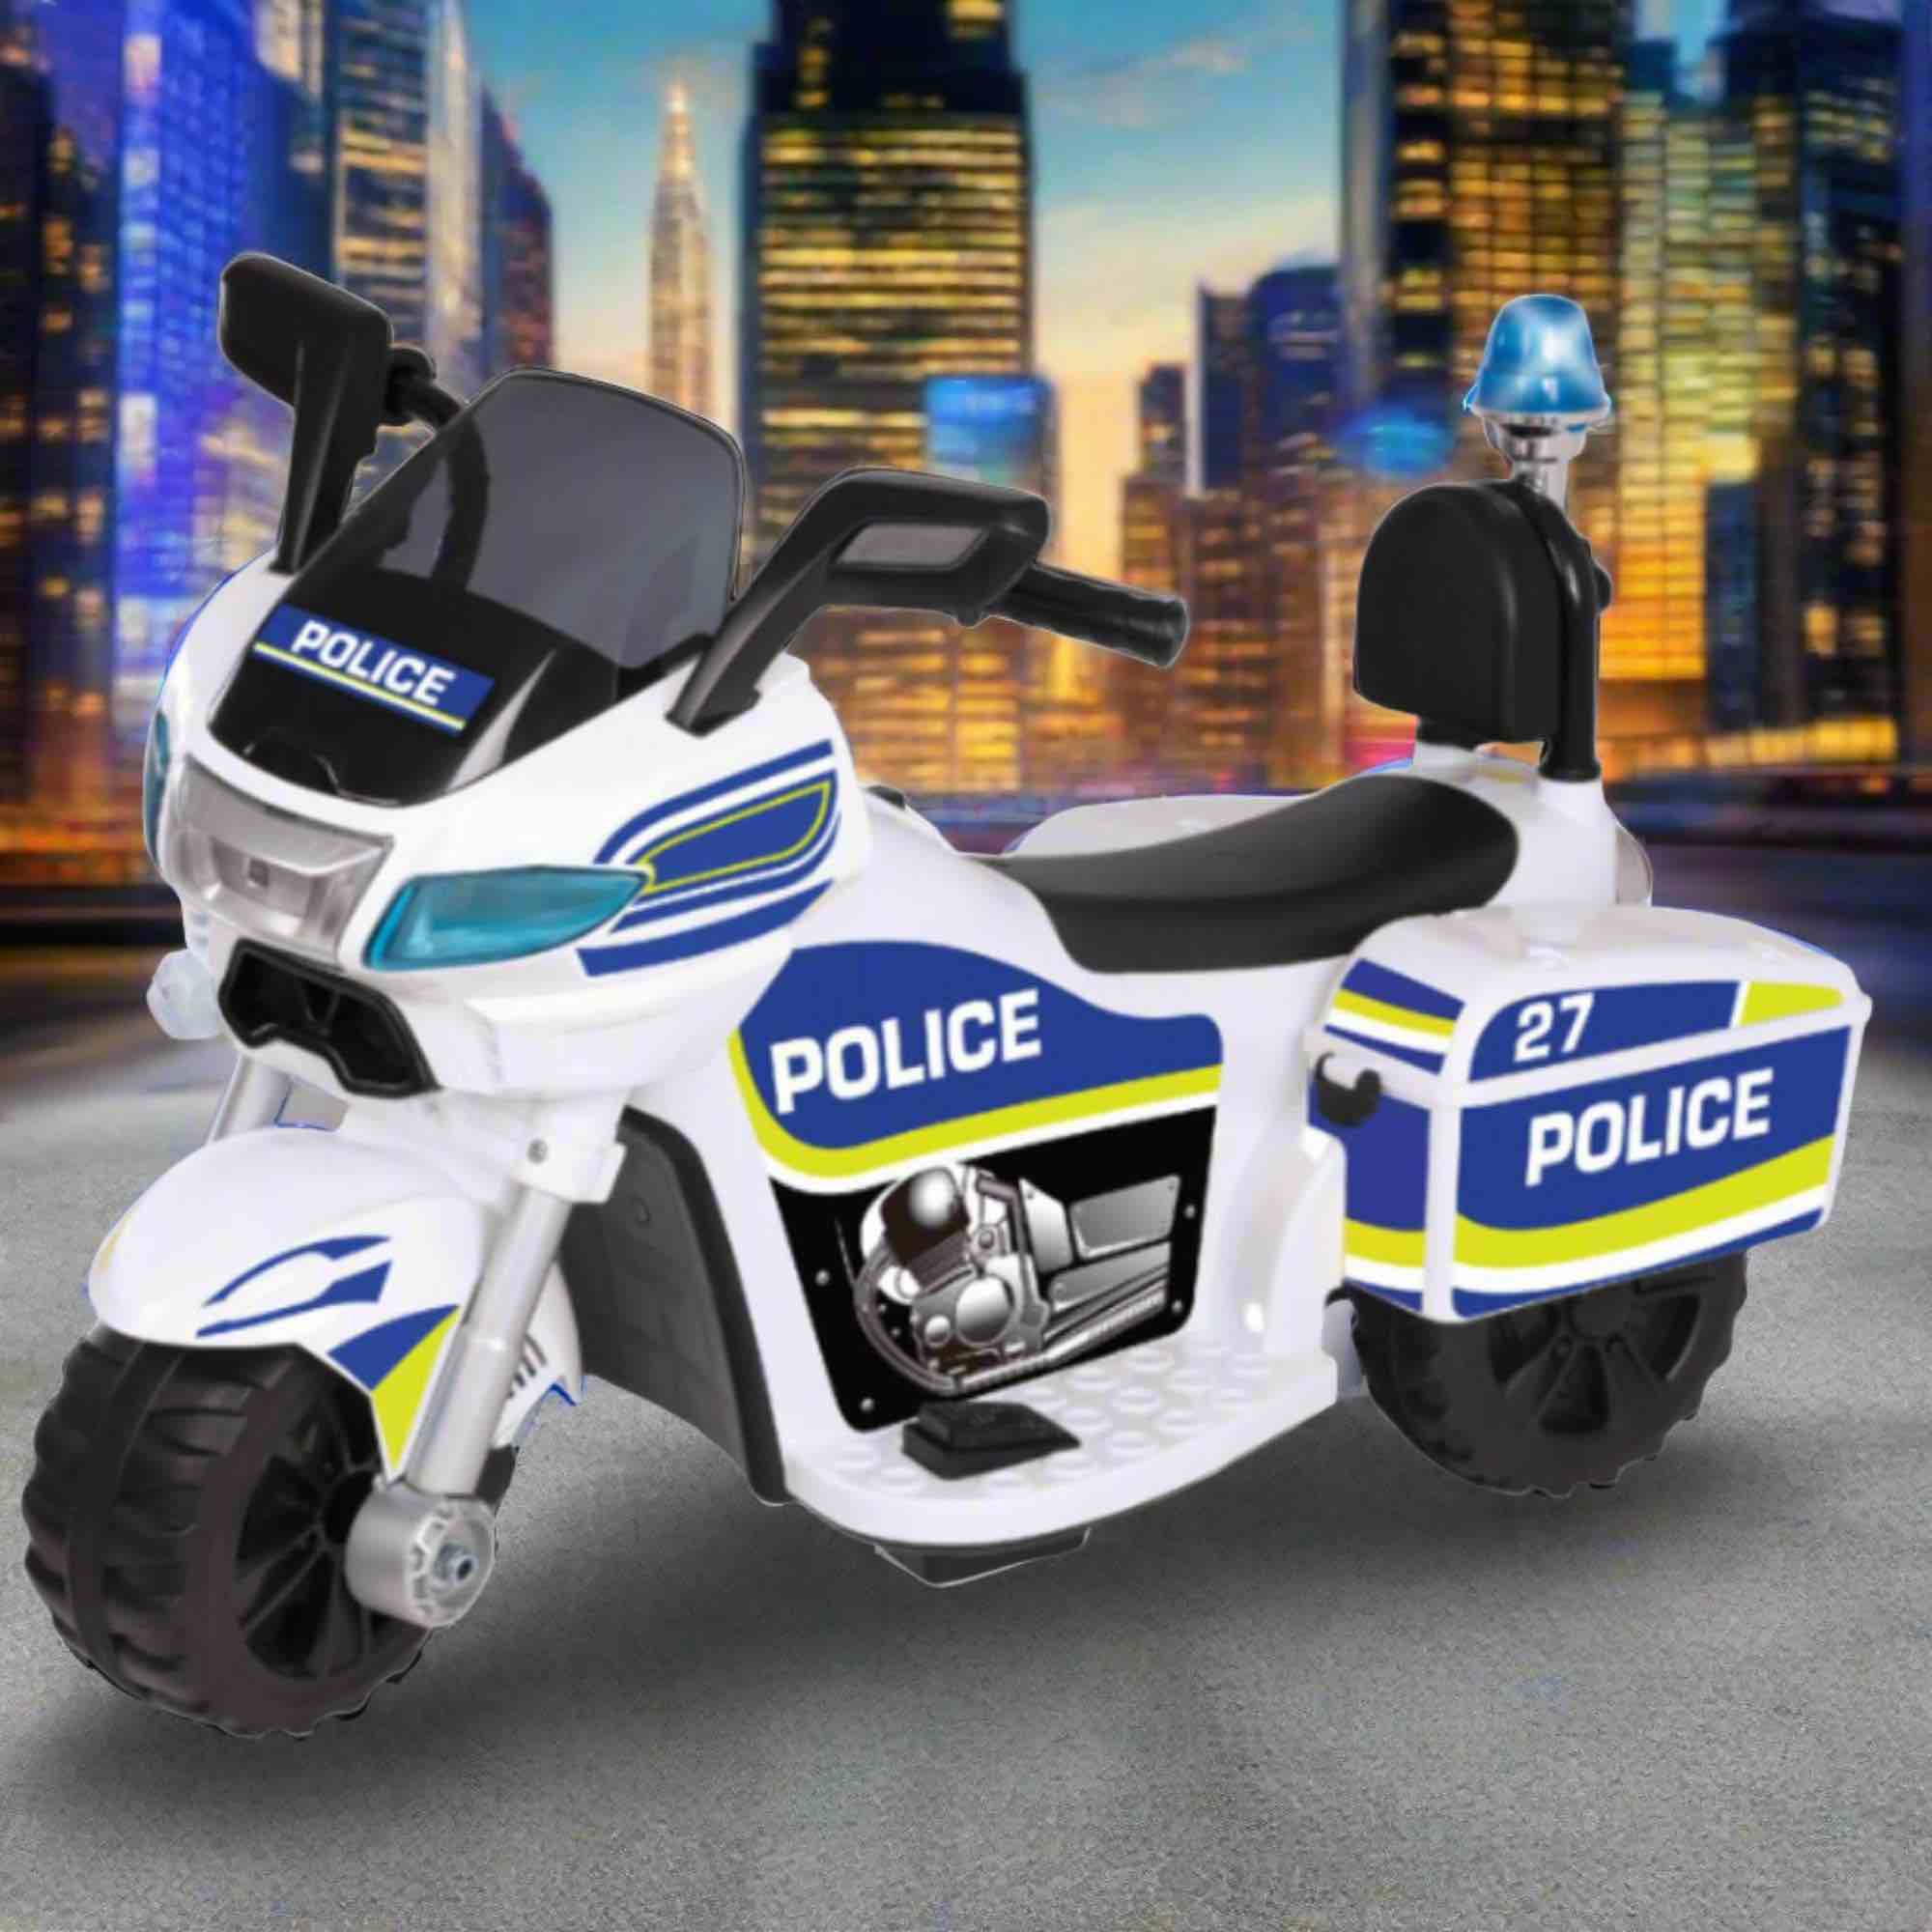 EVO Police Sport Bike Ride On for ages 2+, featuring a realistic police bike design with flashing lights and authentic sounds, durable frame, wide stable wheels, and easy-grip handles for safe and exciting outdoor play.